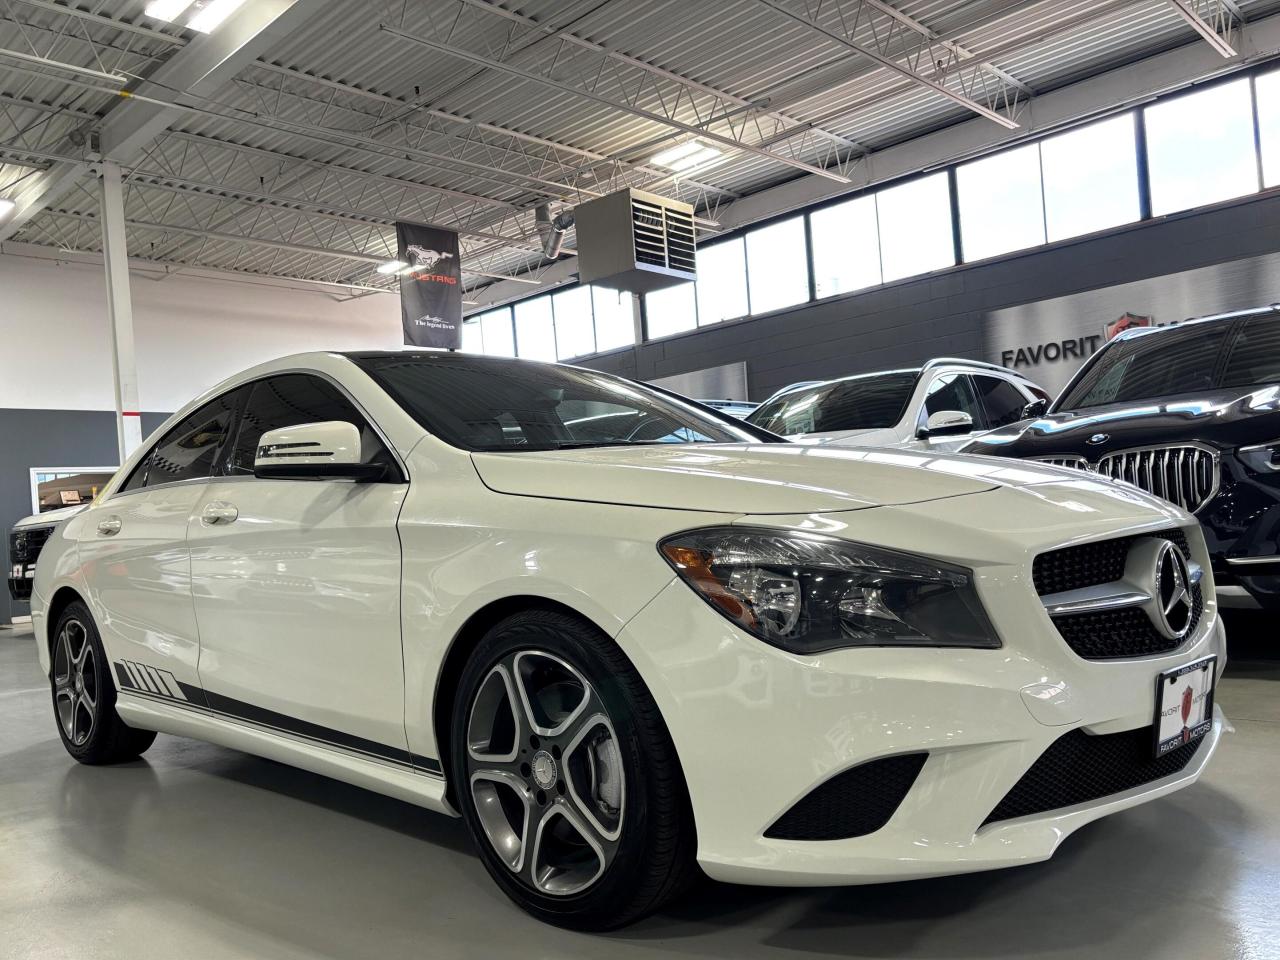 2016 Mercedes-Benz CLA-Class CLA250|4MATIC|NAV|ALLOYS|LEATHER|BACKUP|AMBIENT|++ - Photo #2